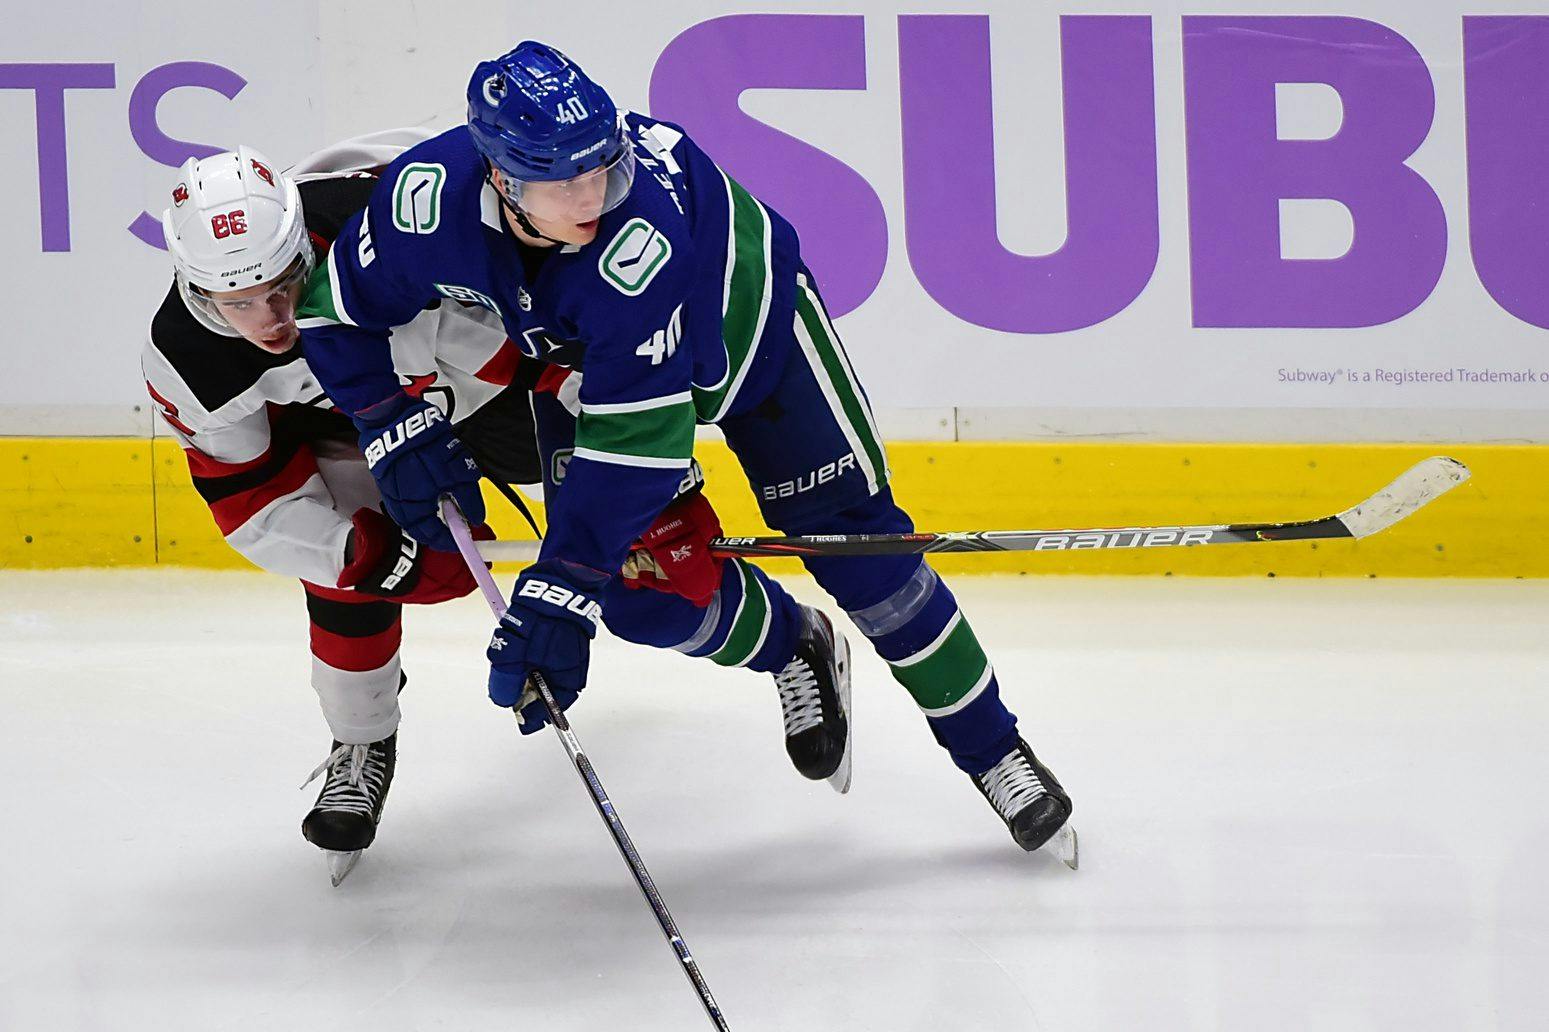 Comparing Elias Pettersson and Jack Hughes: Who would you rather have?